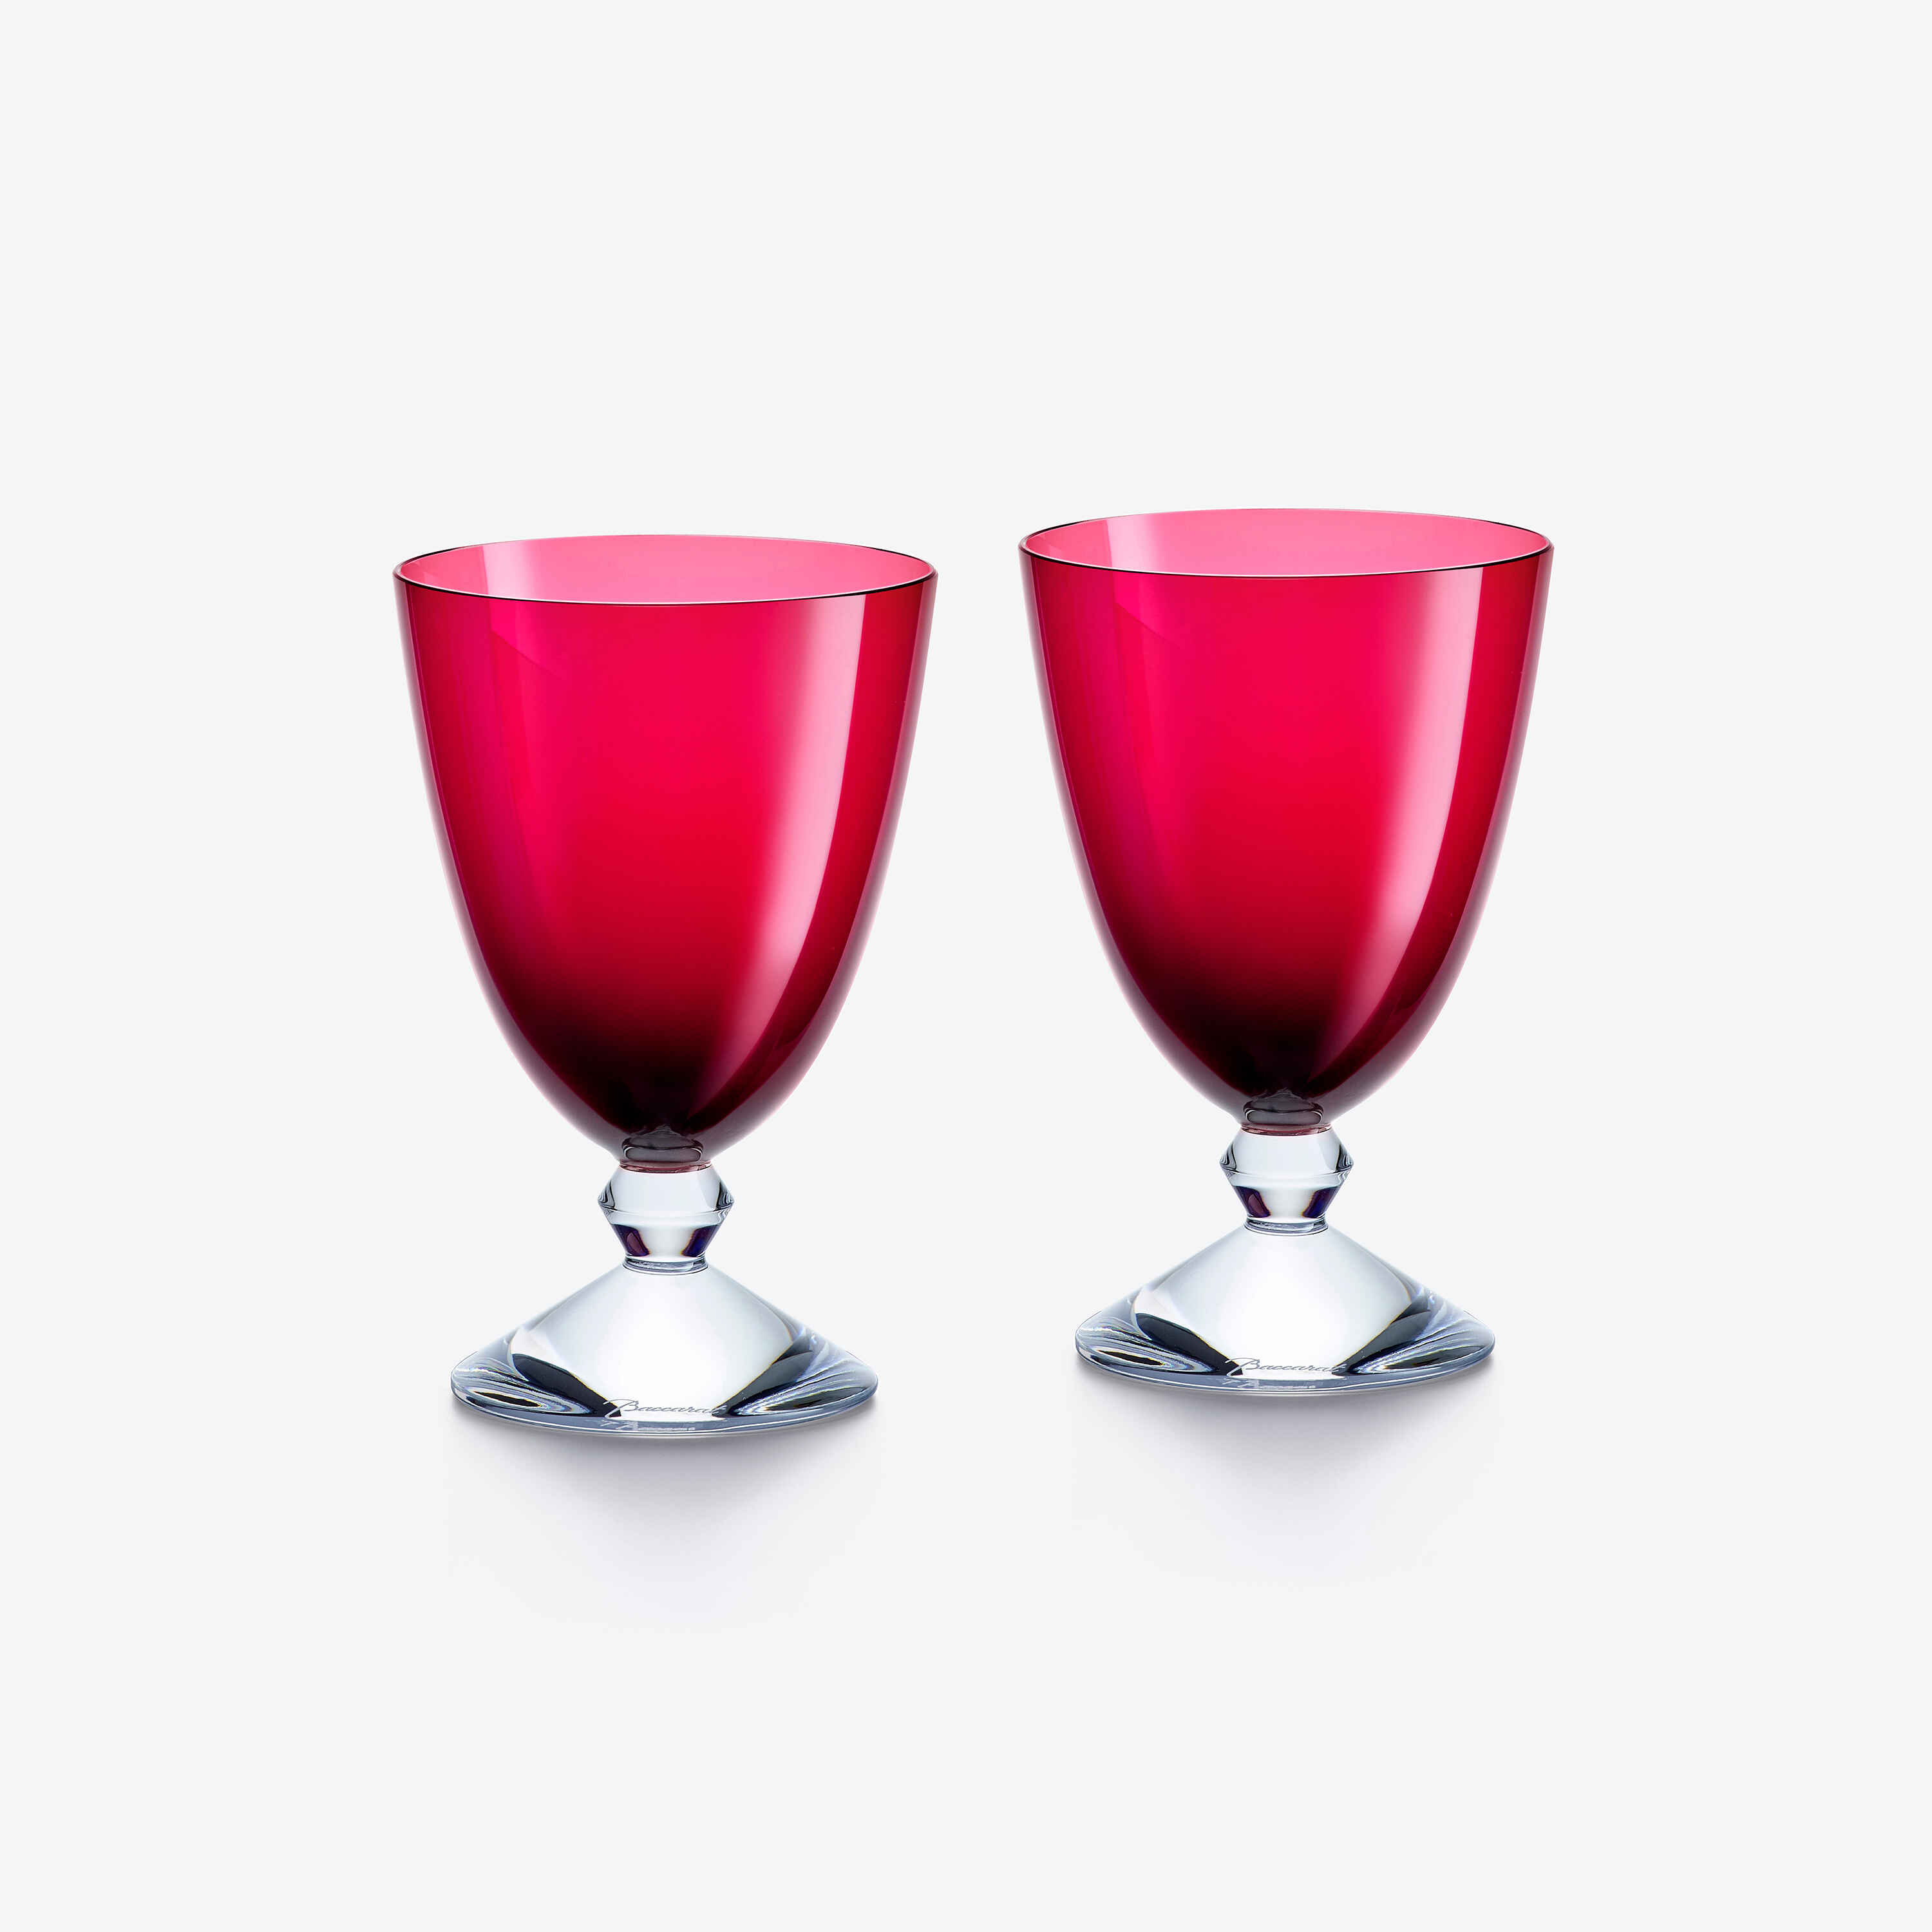 Small Glass Pitchers - Fine table accessories